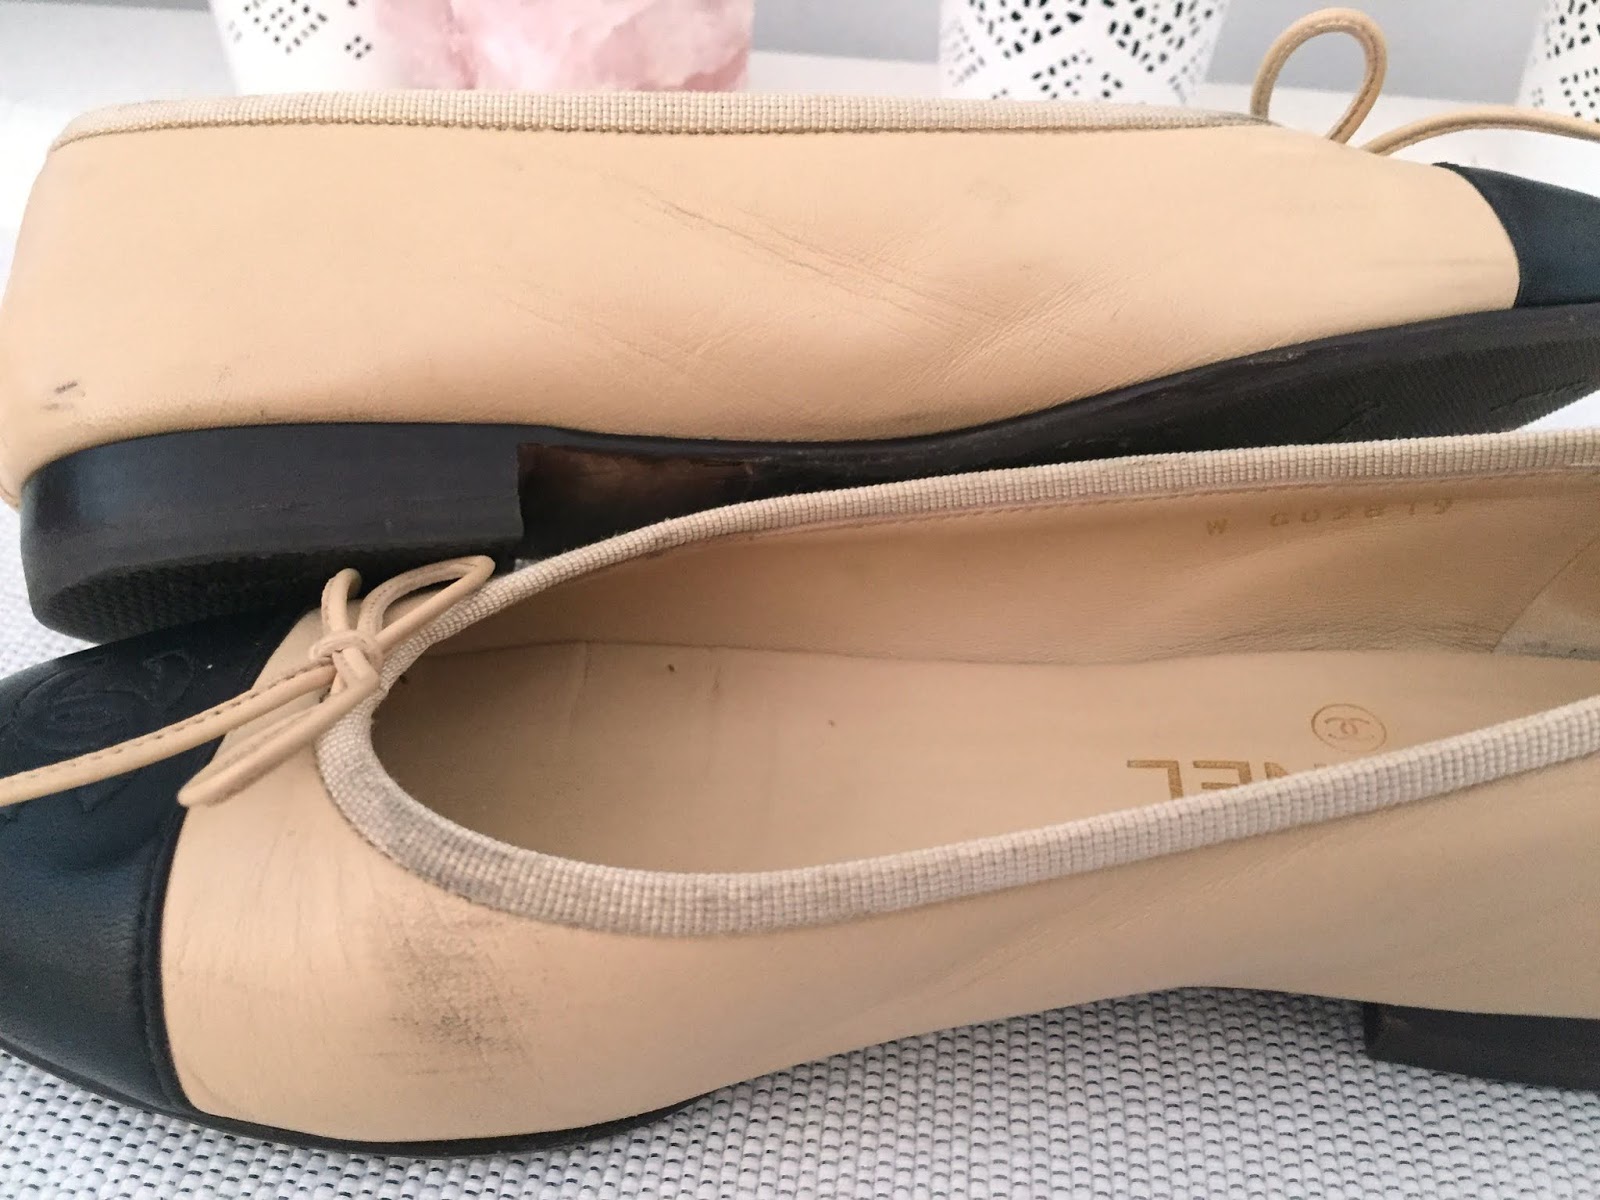 Chanel Flats Sizing & Buying Guide